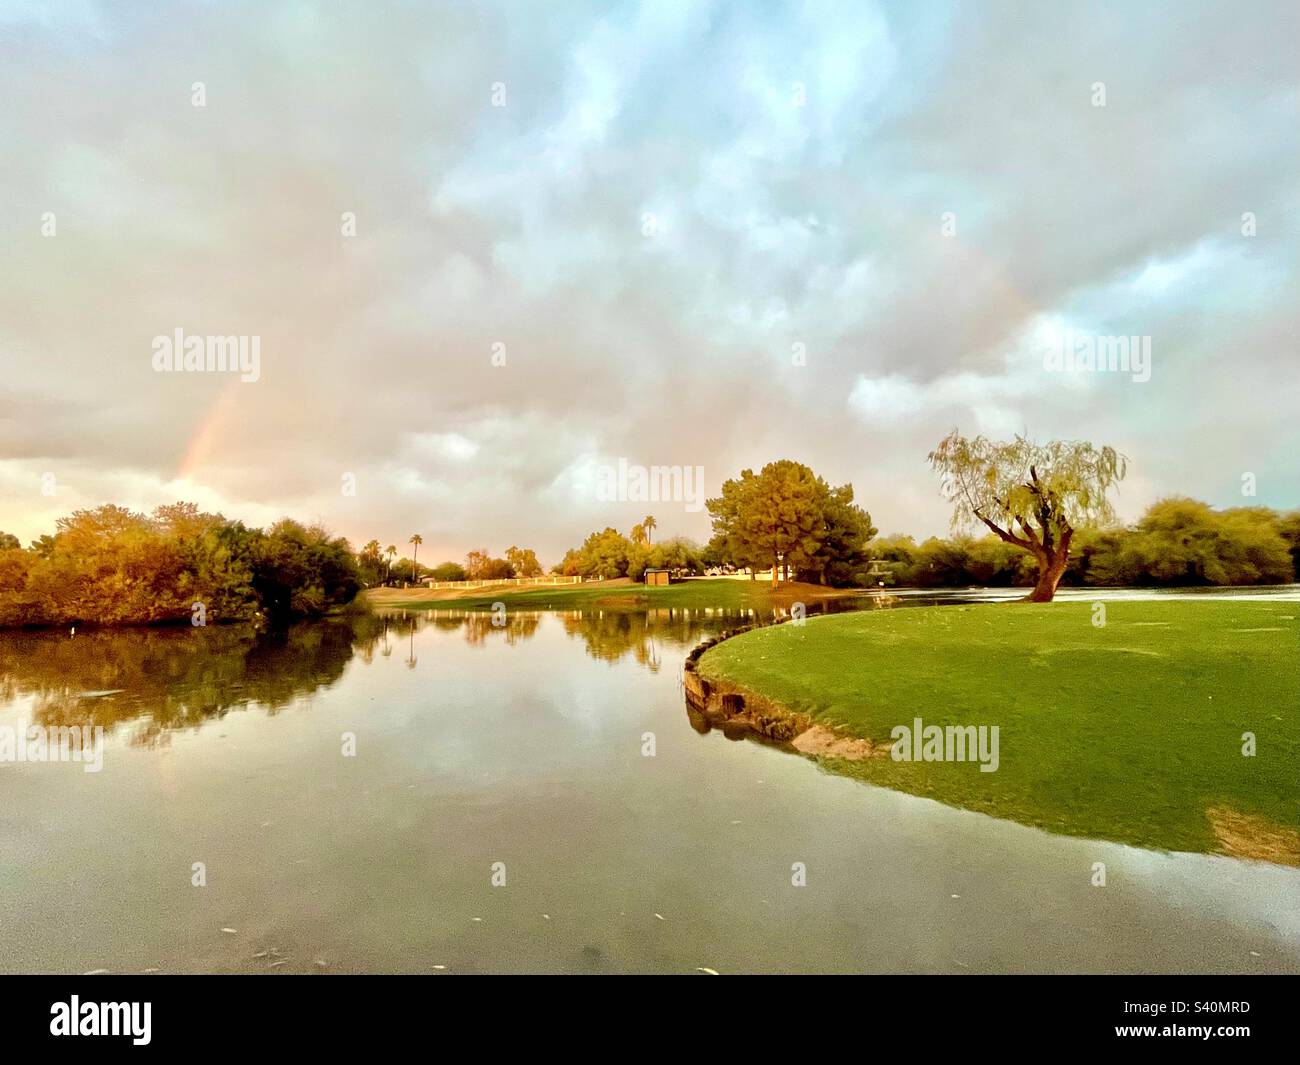 Rainbow and reflection starting to form, arching over willow tree at edge of vibrant green, flooded fairway, stormy sky, golden sunset hues, reflections in pond Stock Photo